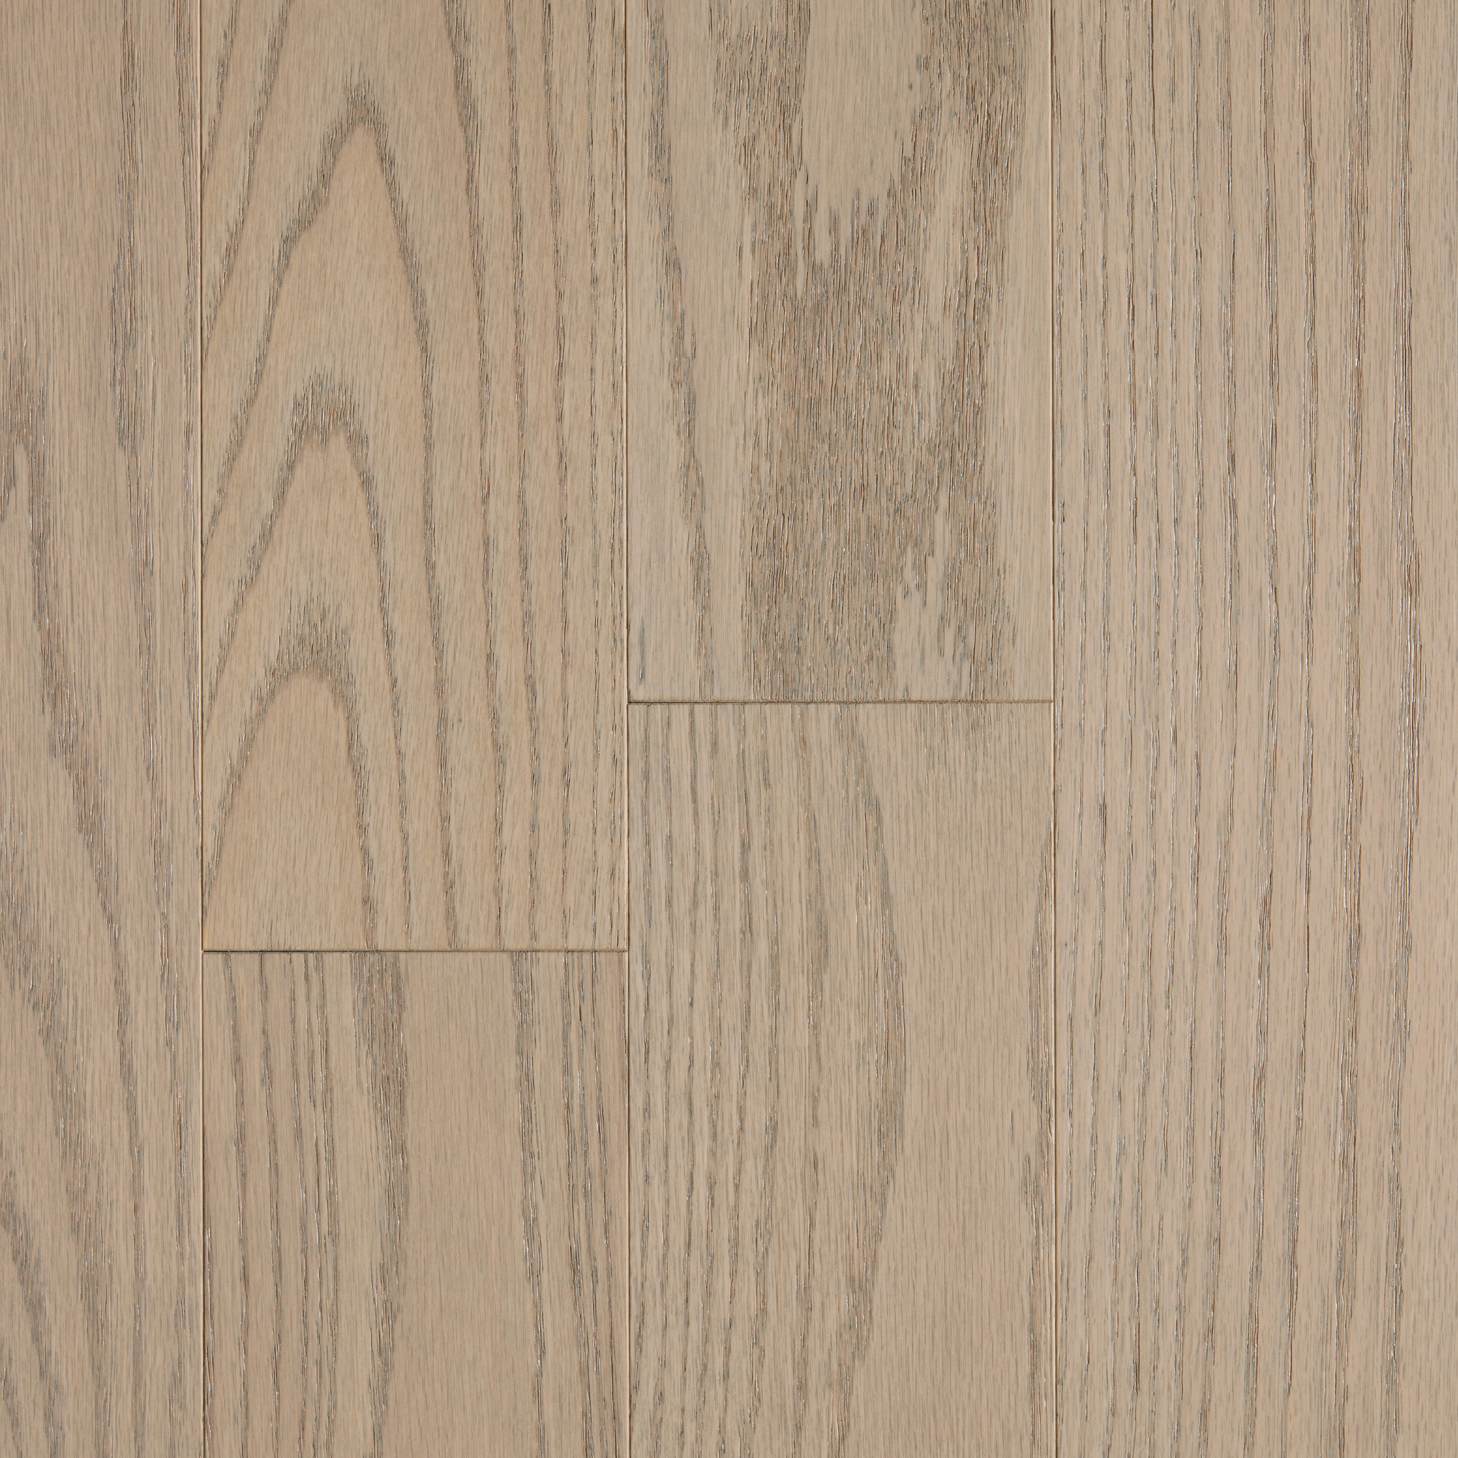 Chêne Rouge Select TB19 / Red Oak Select TB19 - Taupe